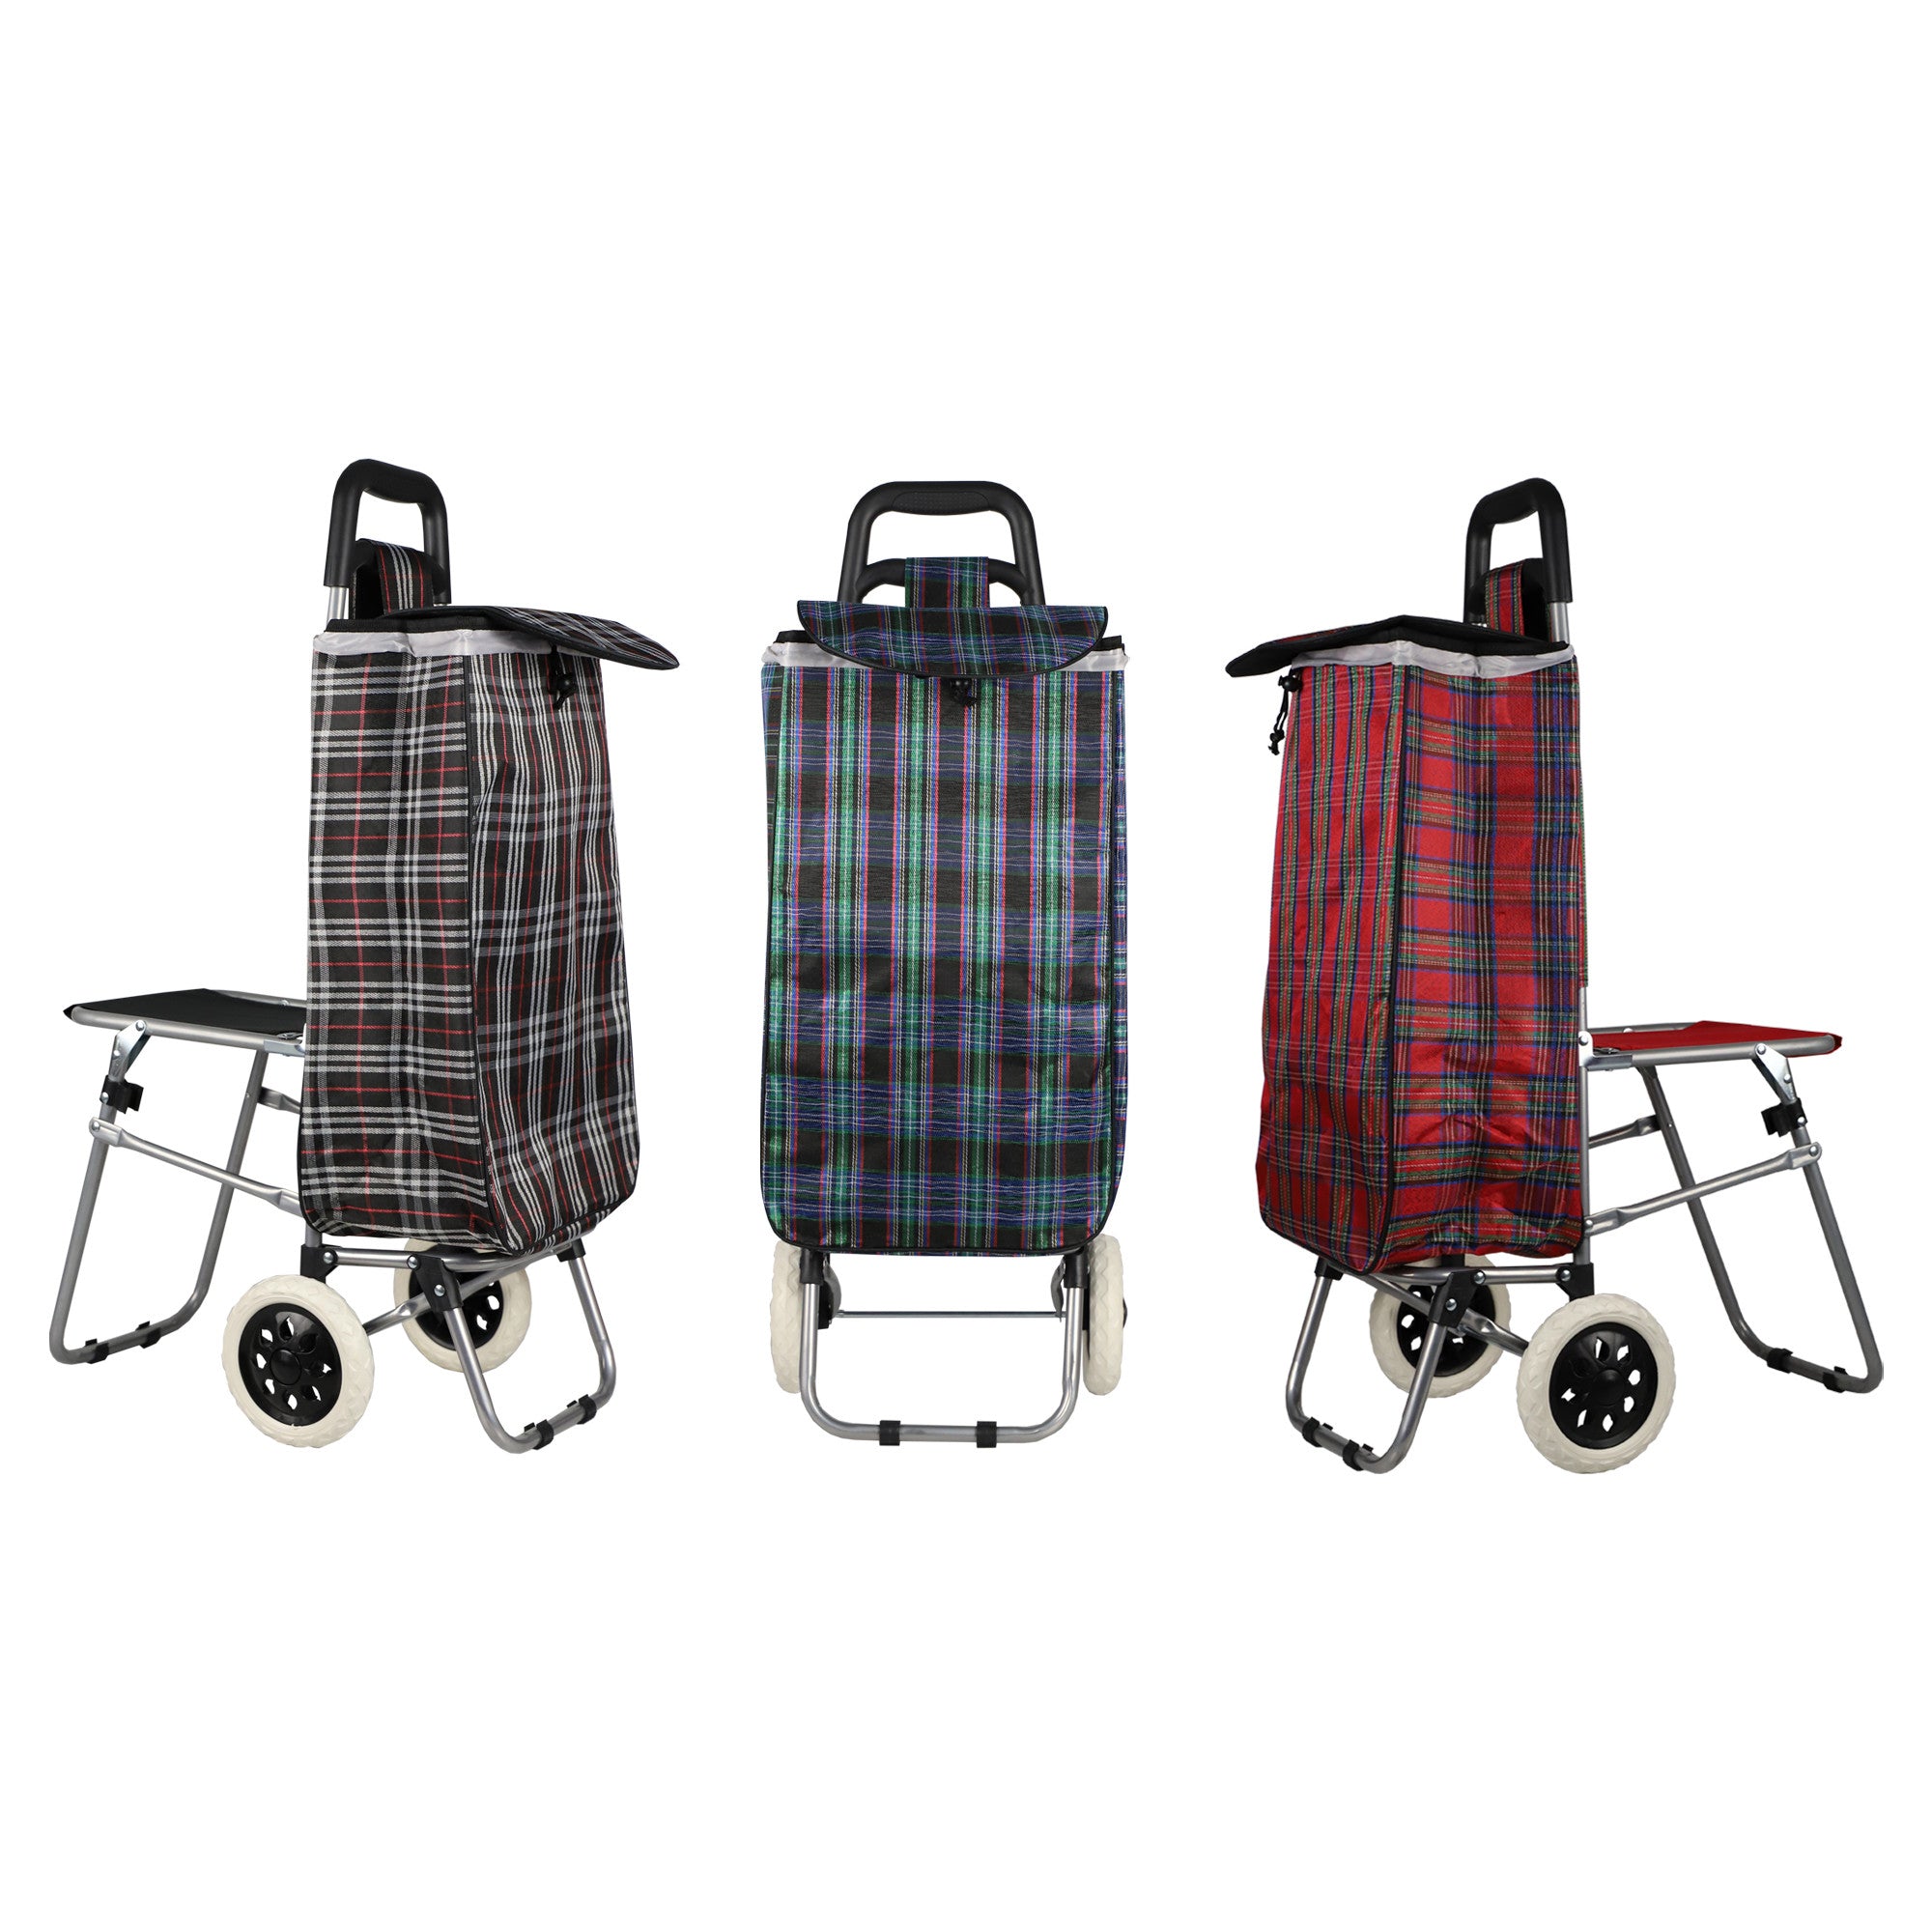 Home Basics Plaid Rolling Shopping Cart with Foldable Built-in Seat - Assorted Colors